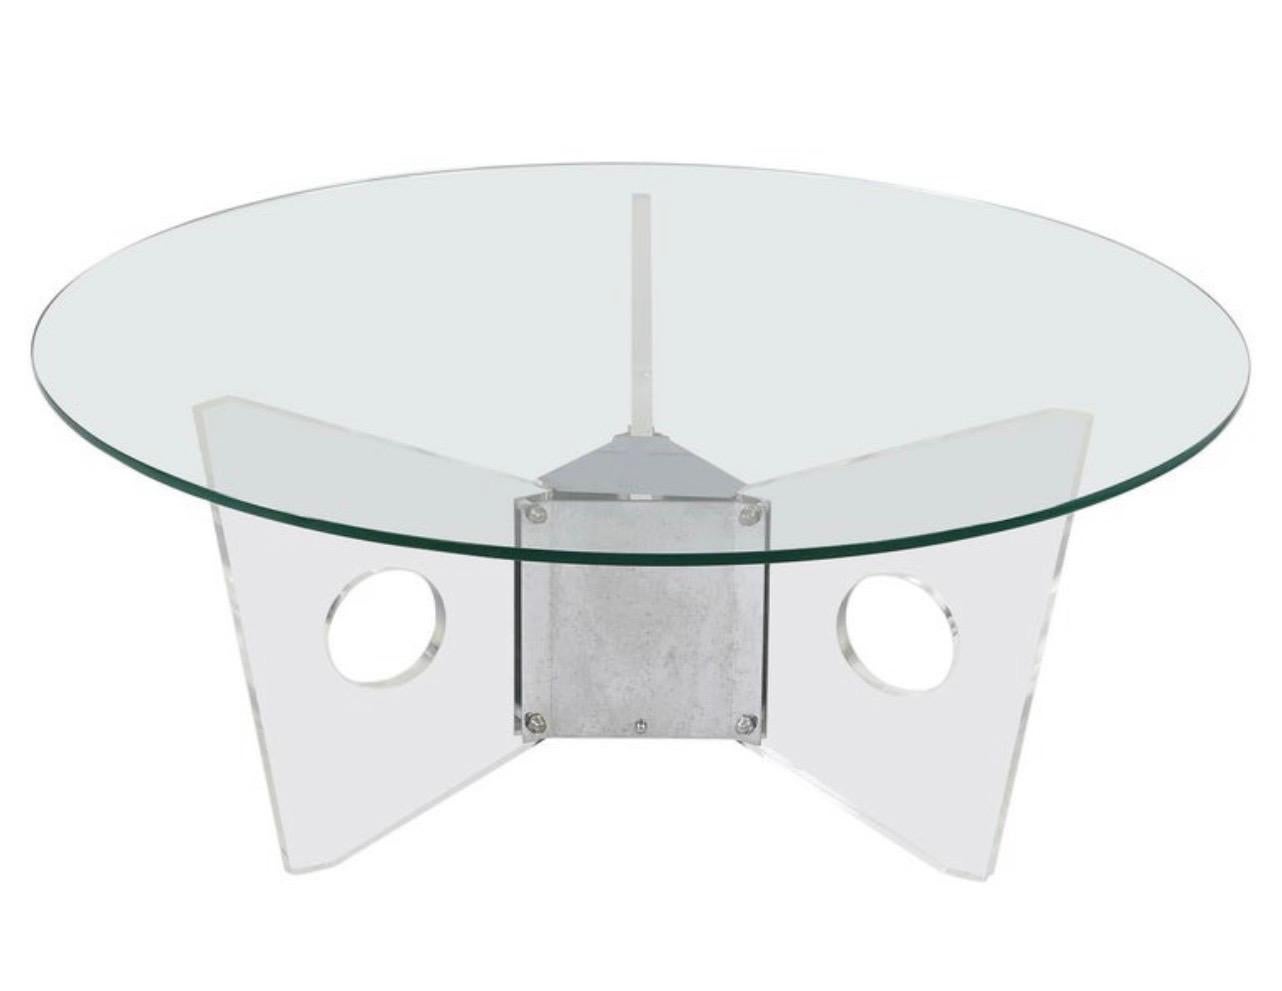 Wonderful Mid-Century Modern Round Glass Top Lucite & Chrome Base Coffee Table In Good Condition For Sale In Roslyn, NY